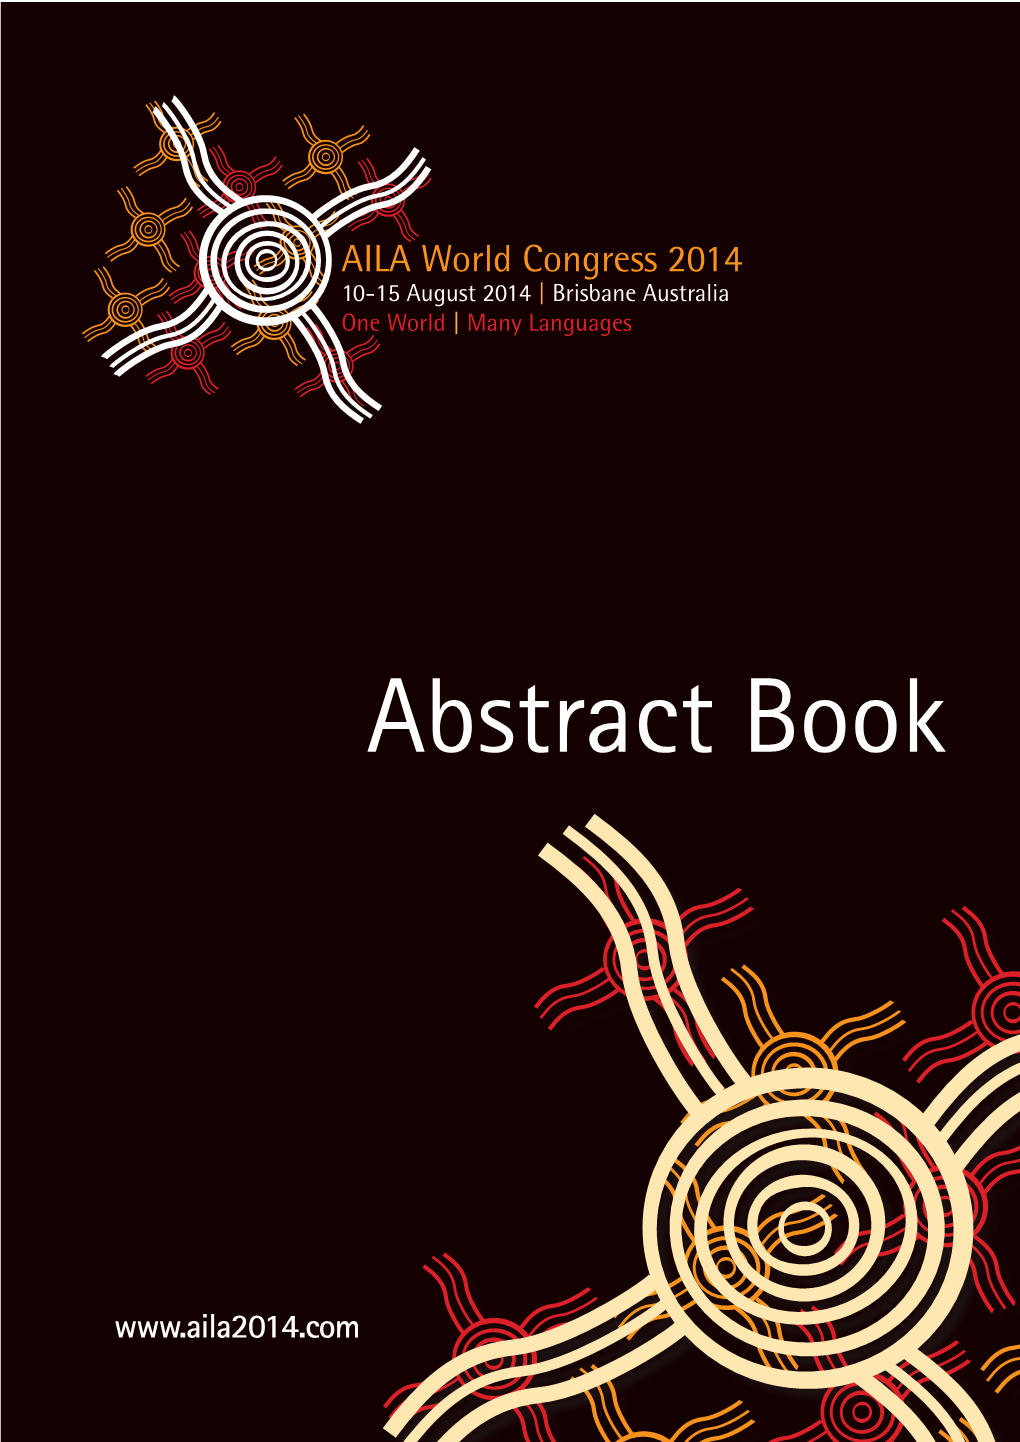 AILA 2014 Abstract Book